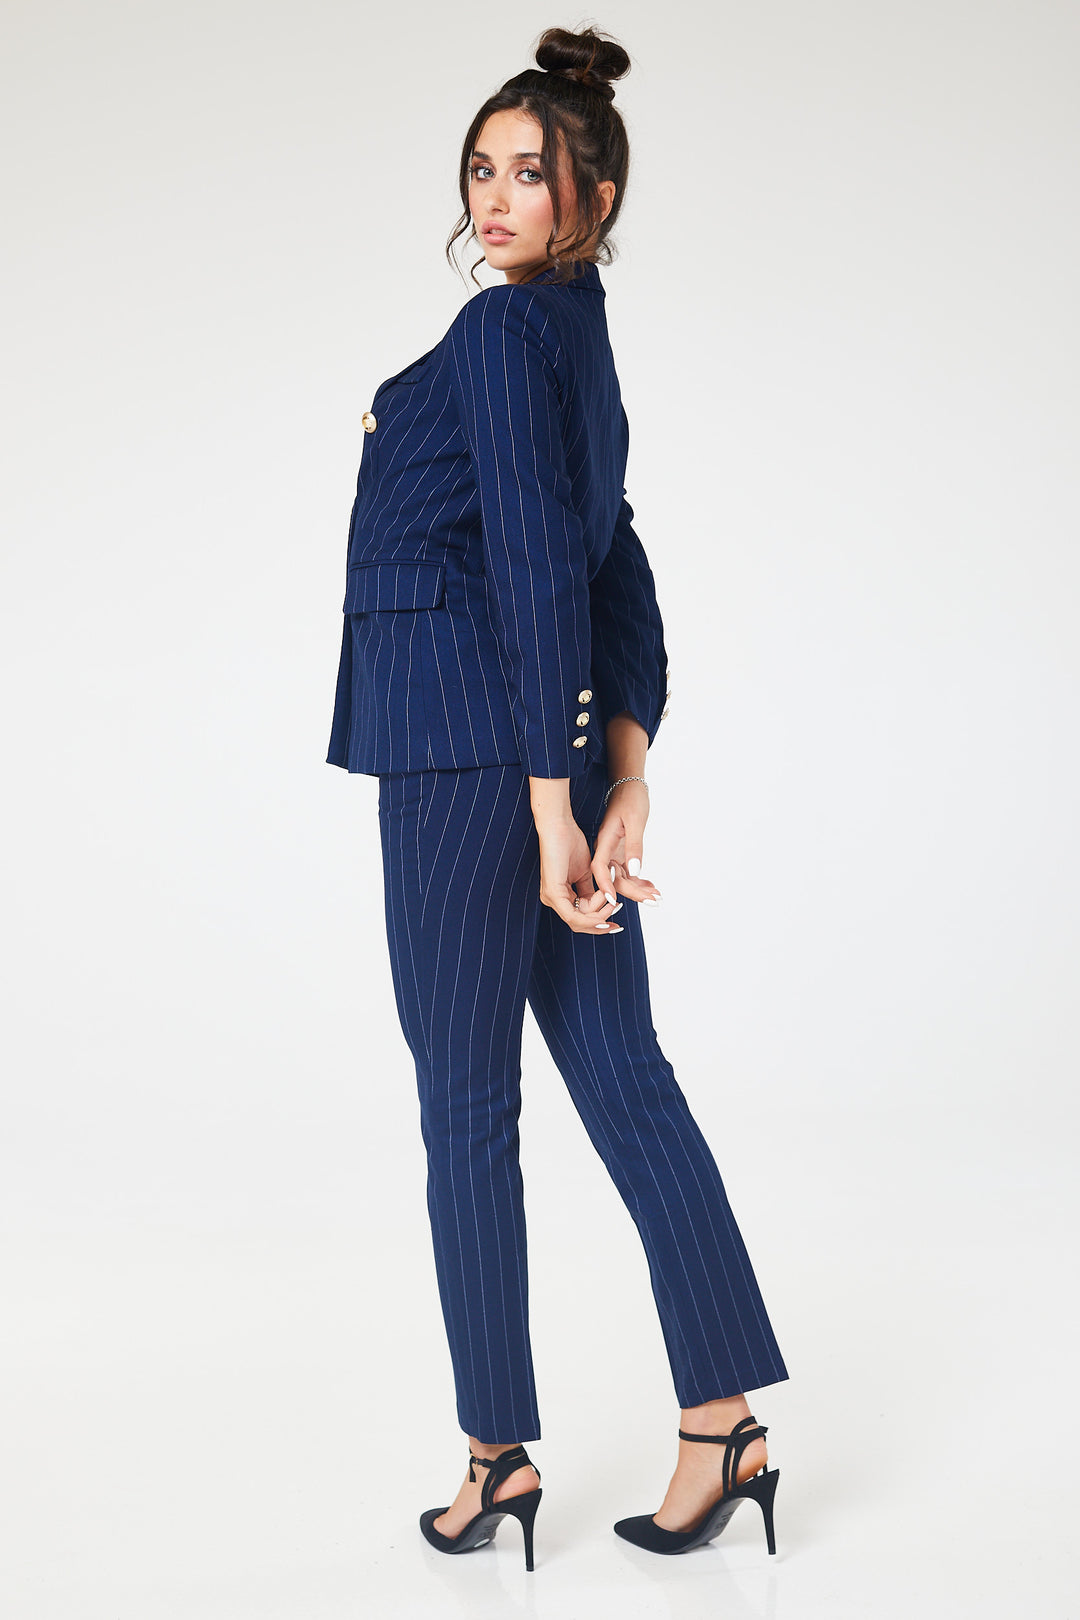 Navy Pinstriped Double Breasted 2-Piece Suit